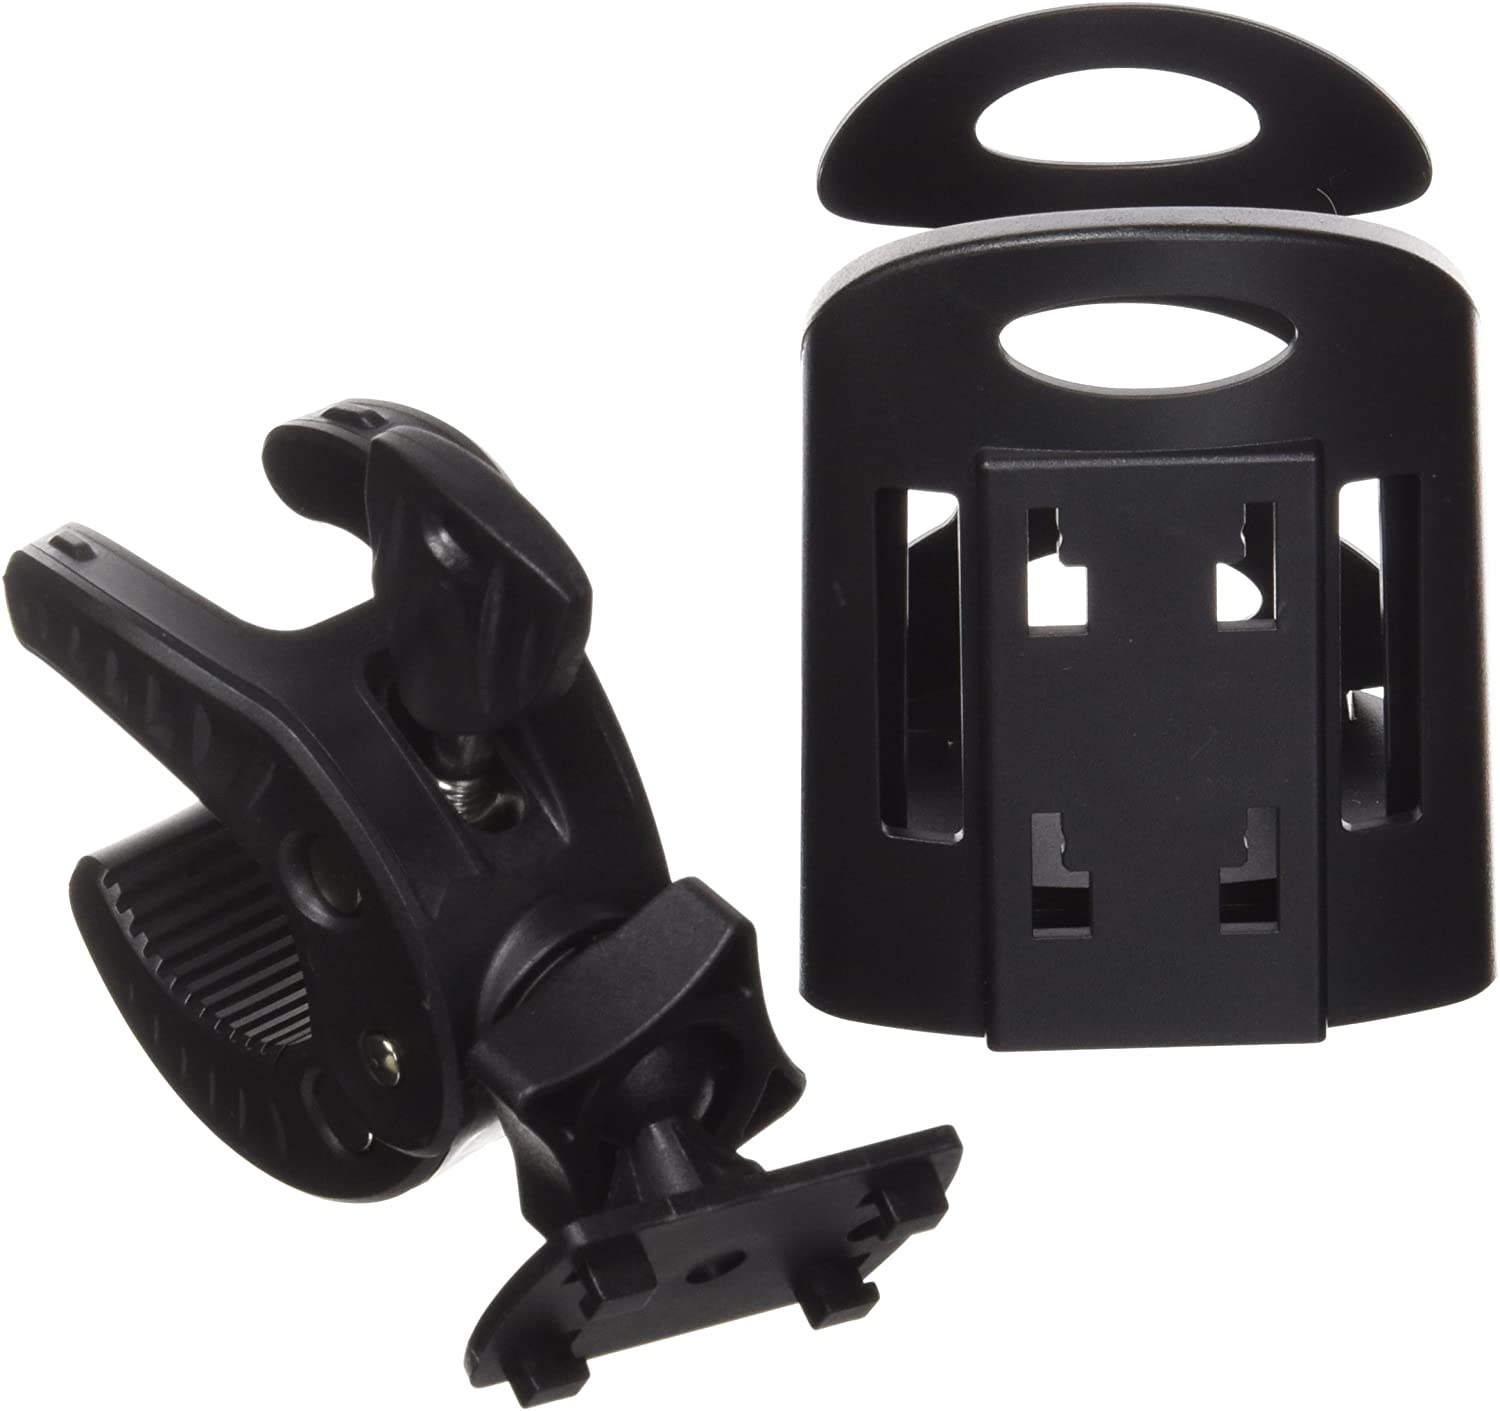 Karman Healthcare Universal Cup Holder for Wheelchairs Or Walkers - Senior.com Cup Holders